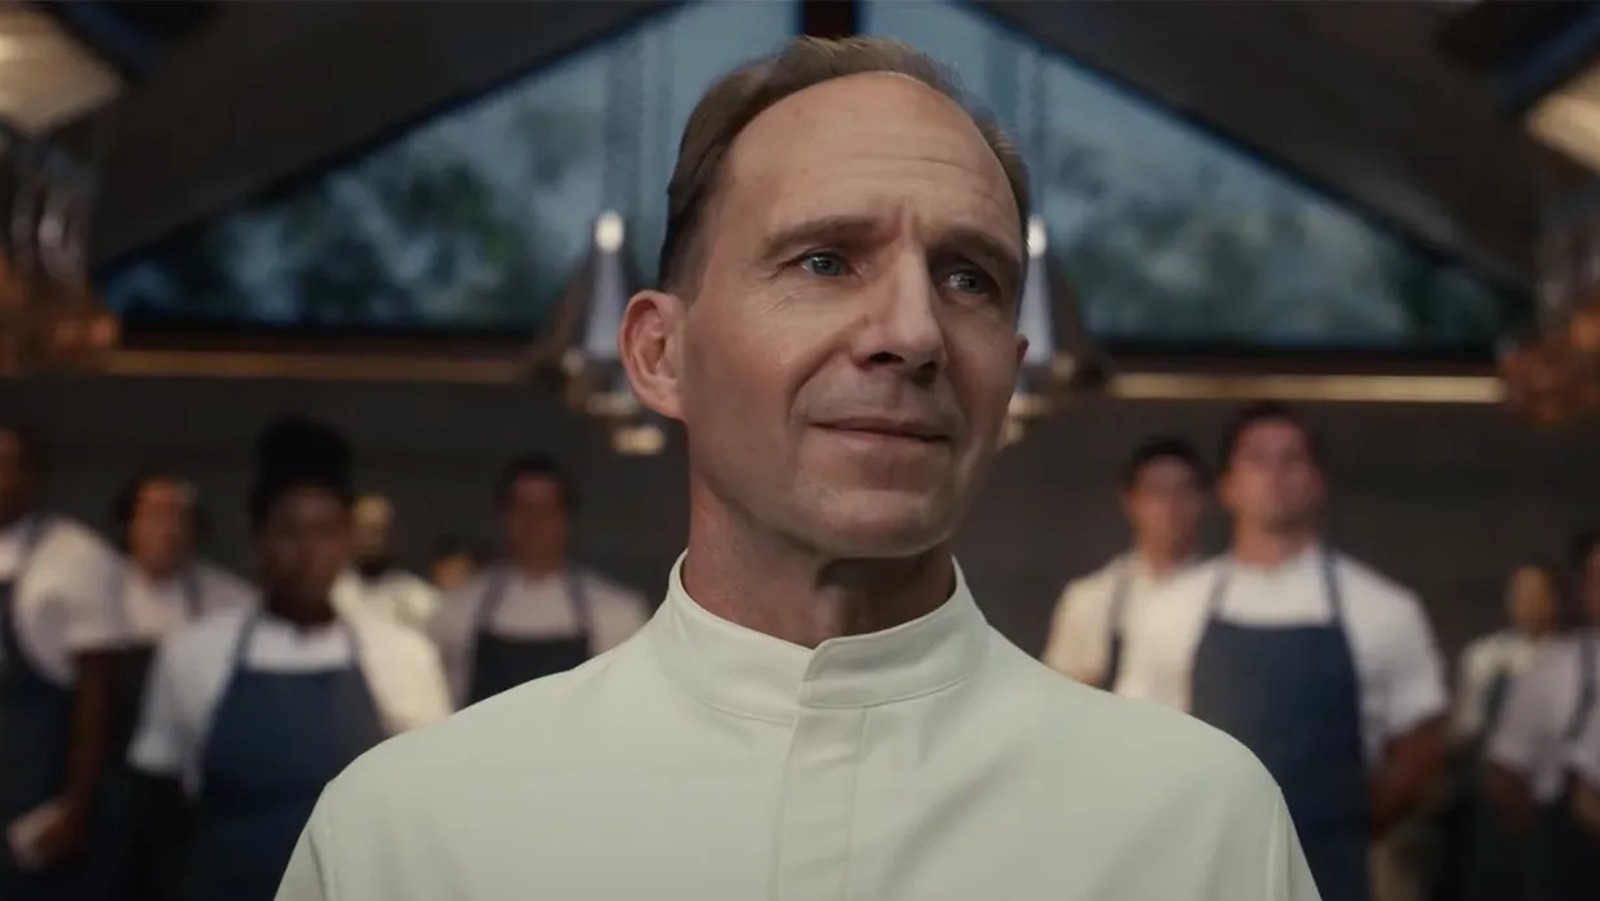 Review: “The Menu” Serves Ralph Fiennes in a Terrifying, True-to-Life Role  - Eater